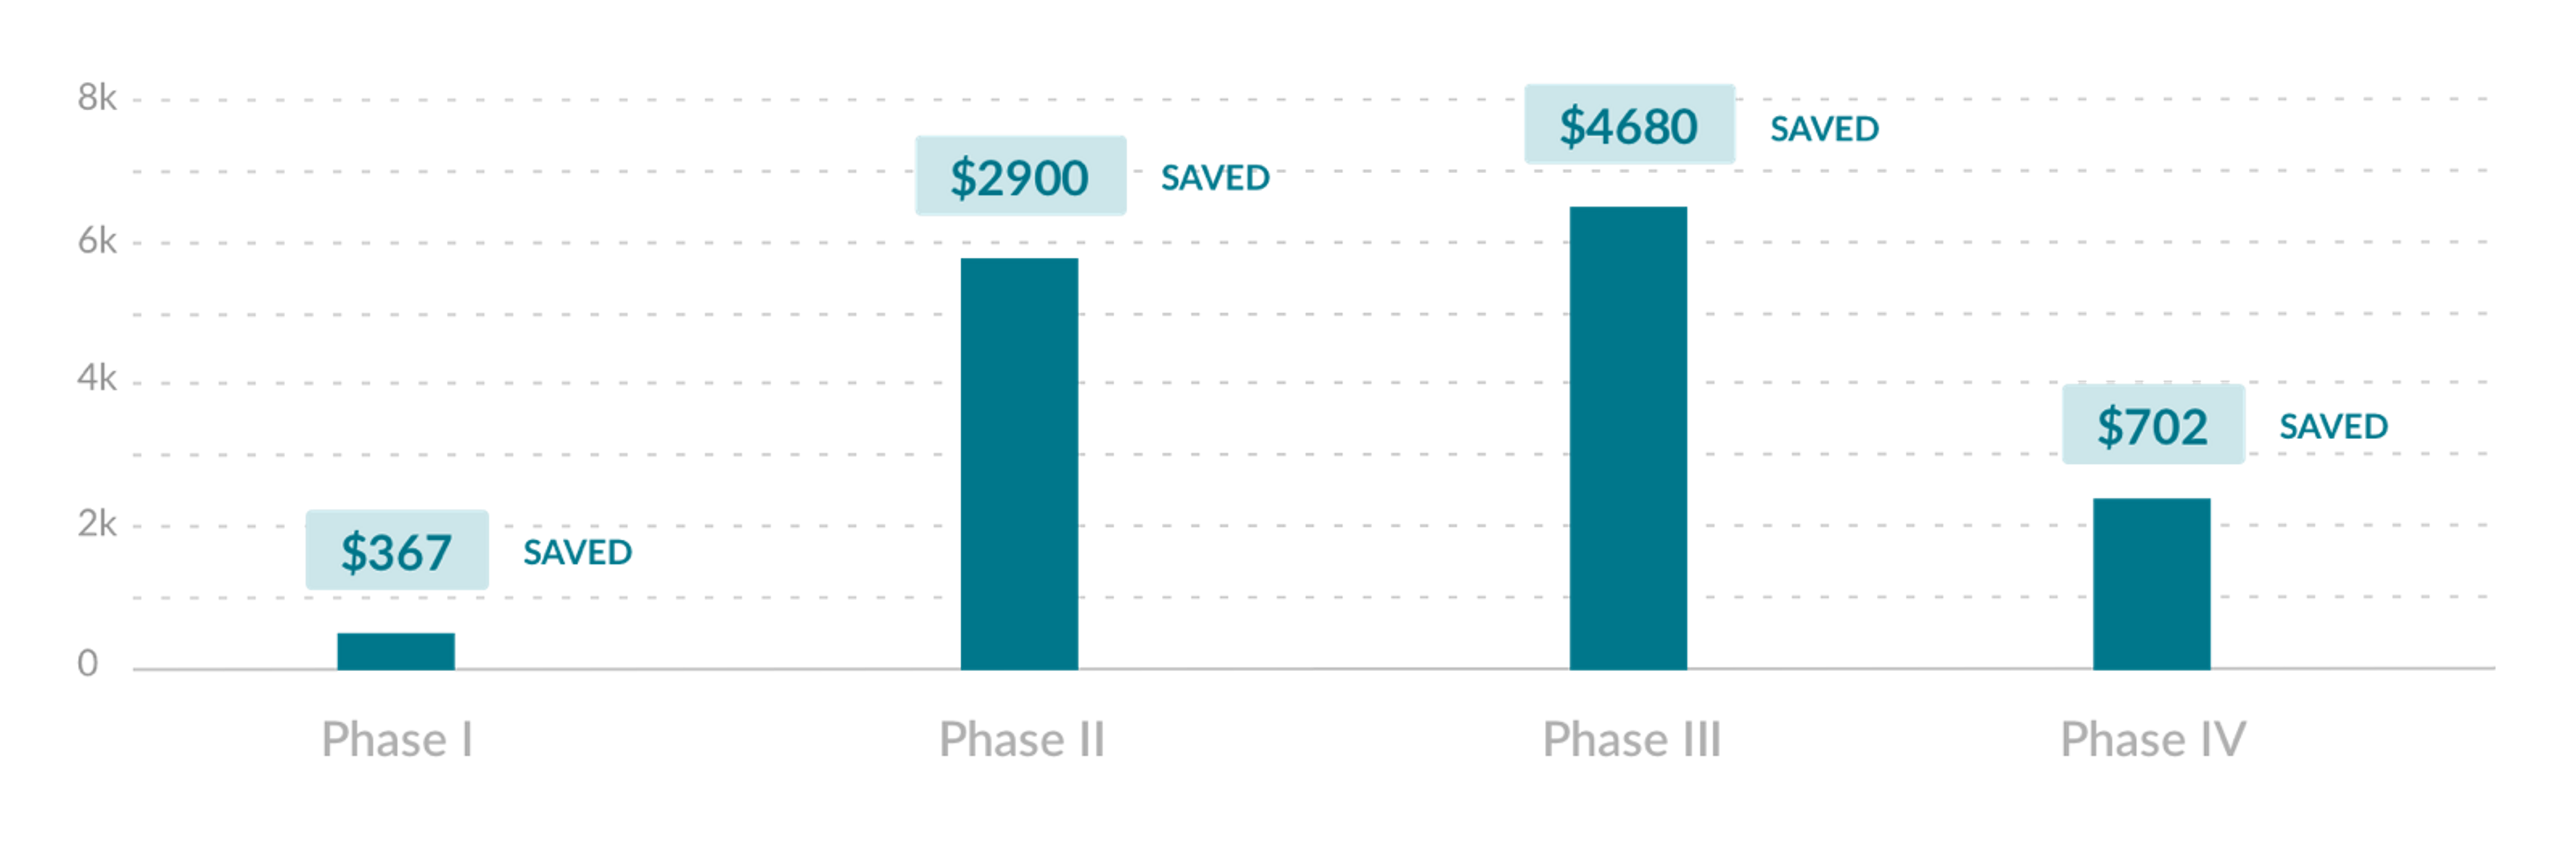 A graph detailing the trial costs savings per patient per trial phase